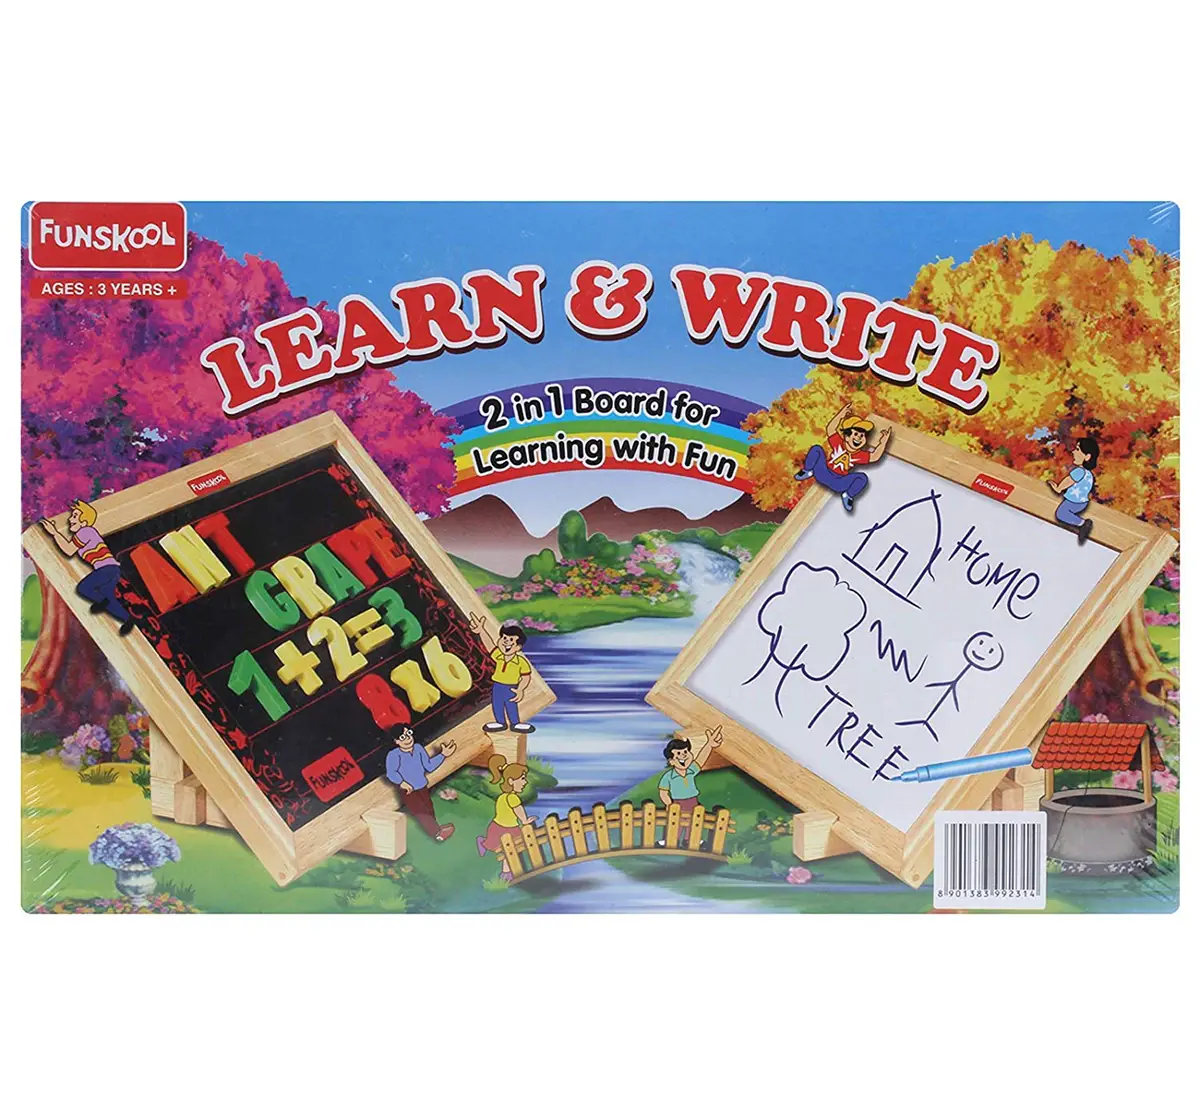 Giggles Funskool Learn And Write Early Learner Toys for Kids age 3Y+ (White)